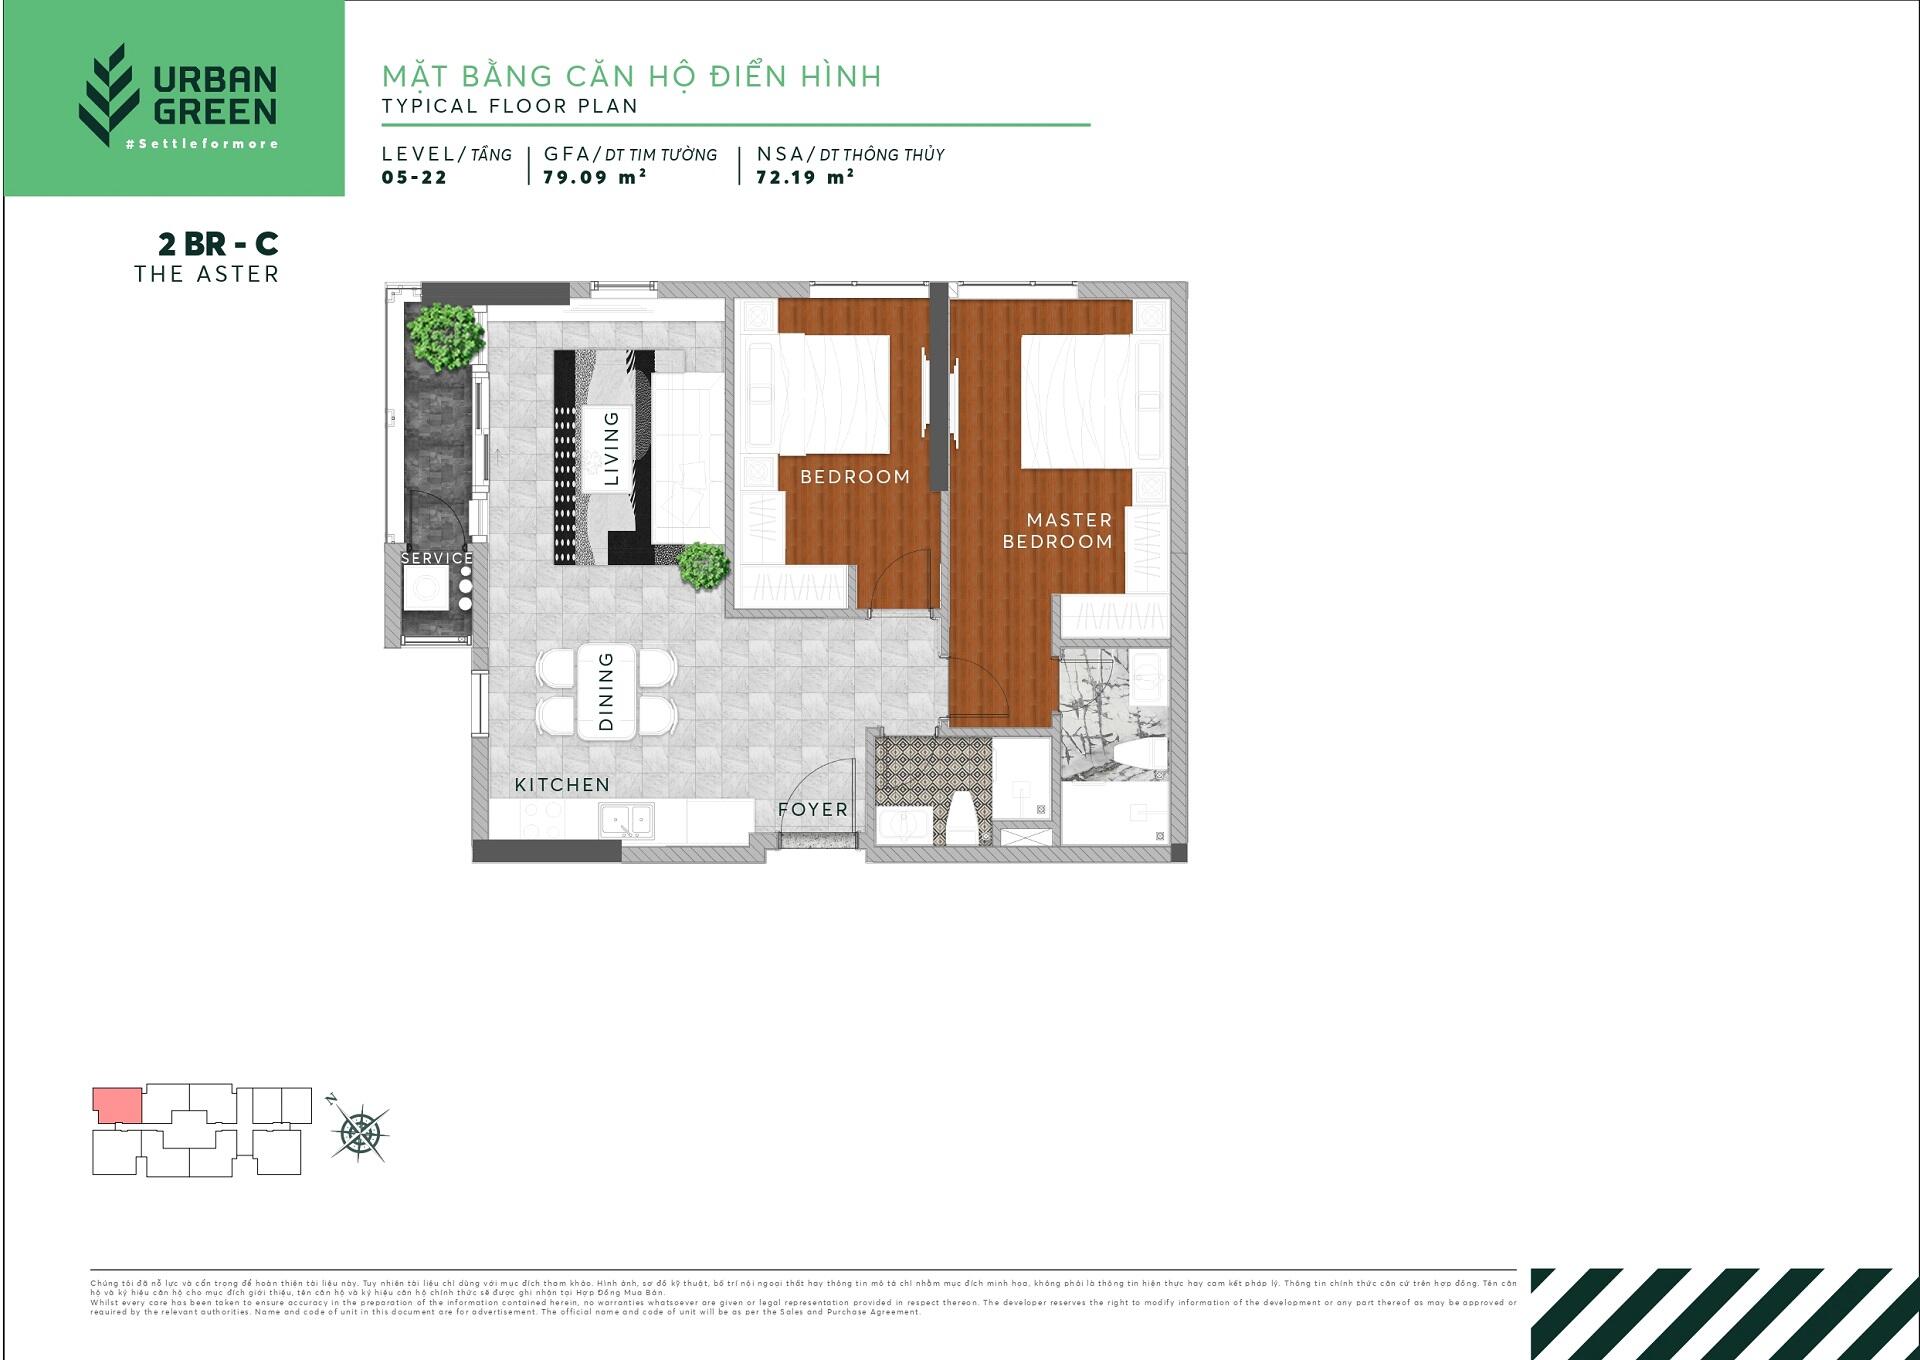 Floor plan of The Aster apartment 2 bedrooms 2BR - C